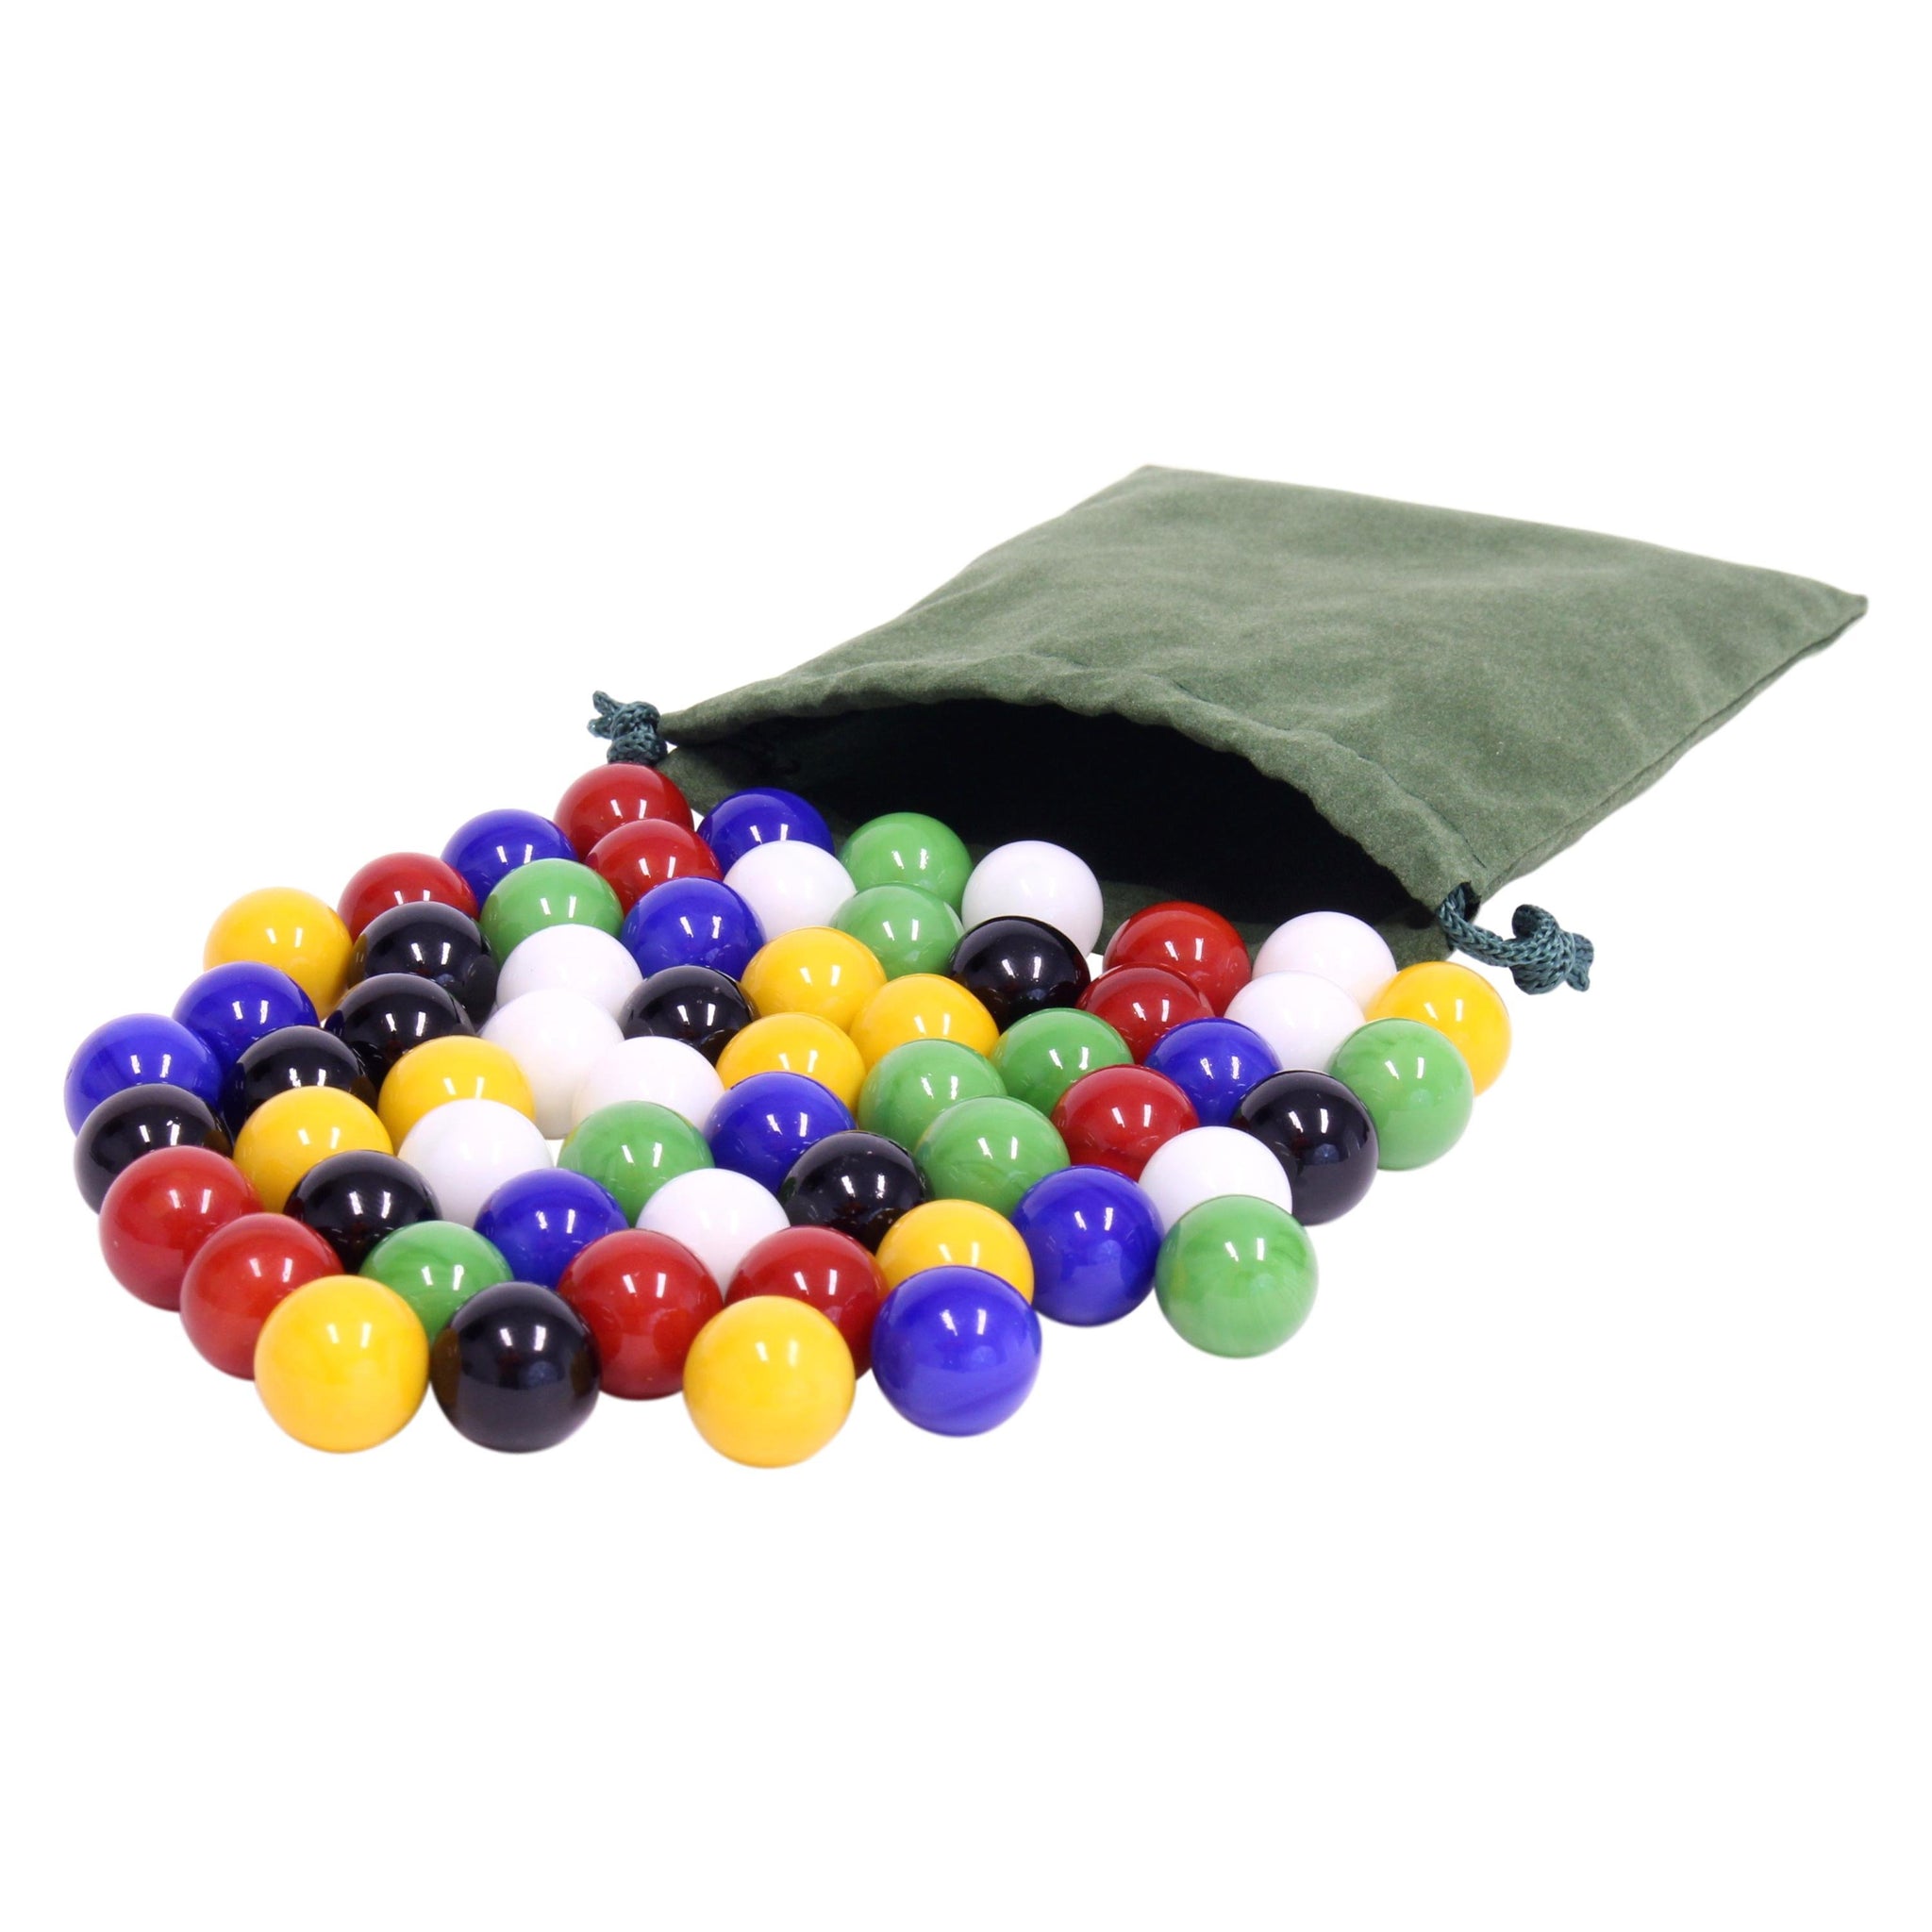 Wholesale High Quality Colored Toy Glass Marbles Balls - China